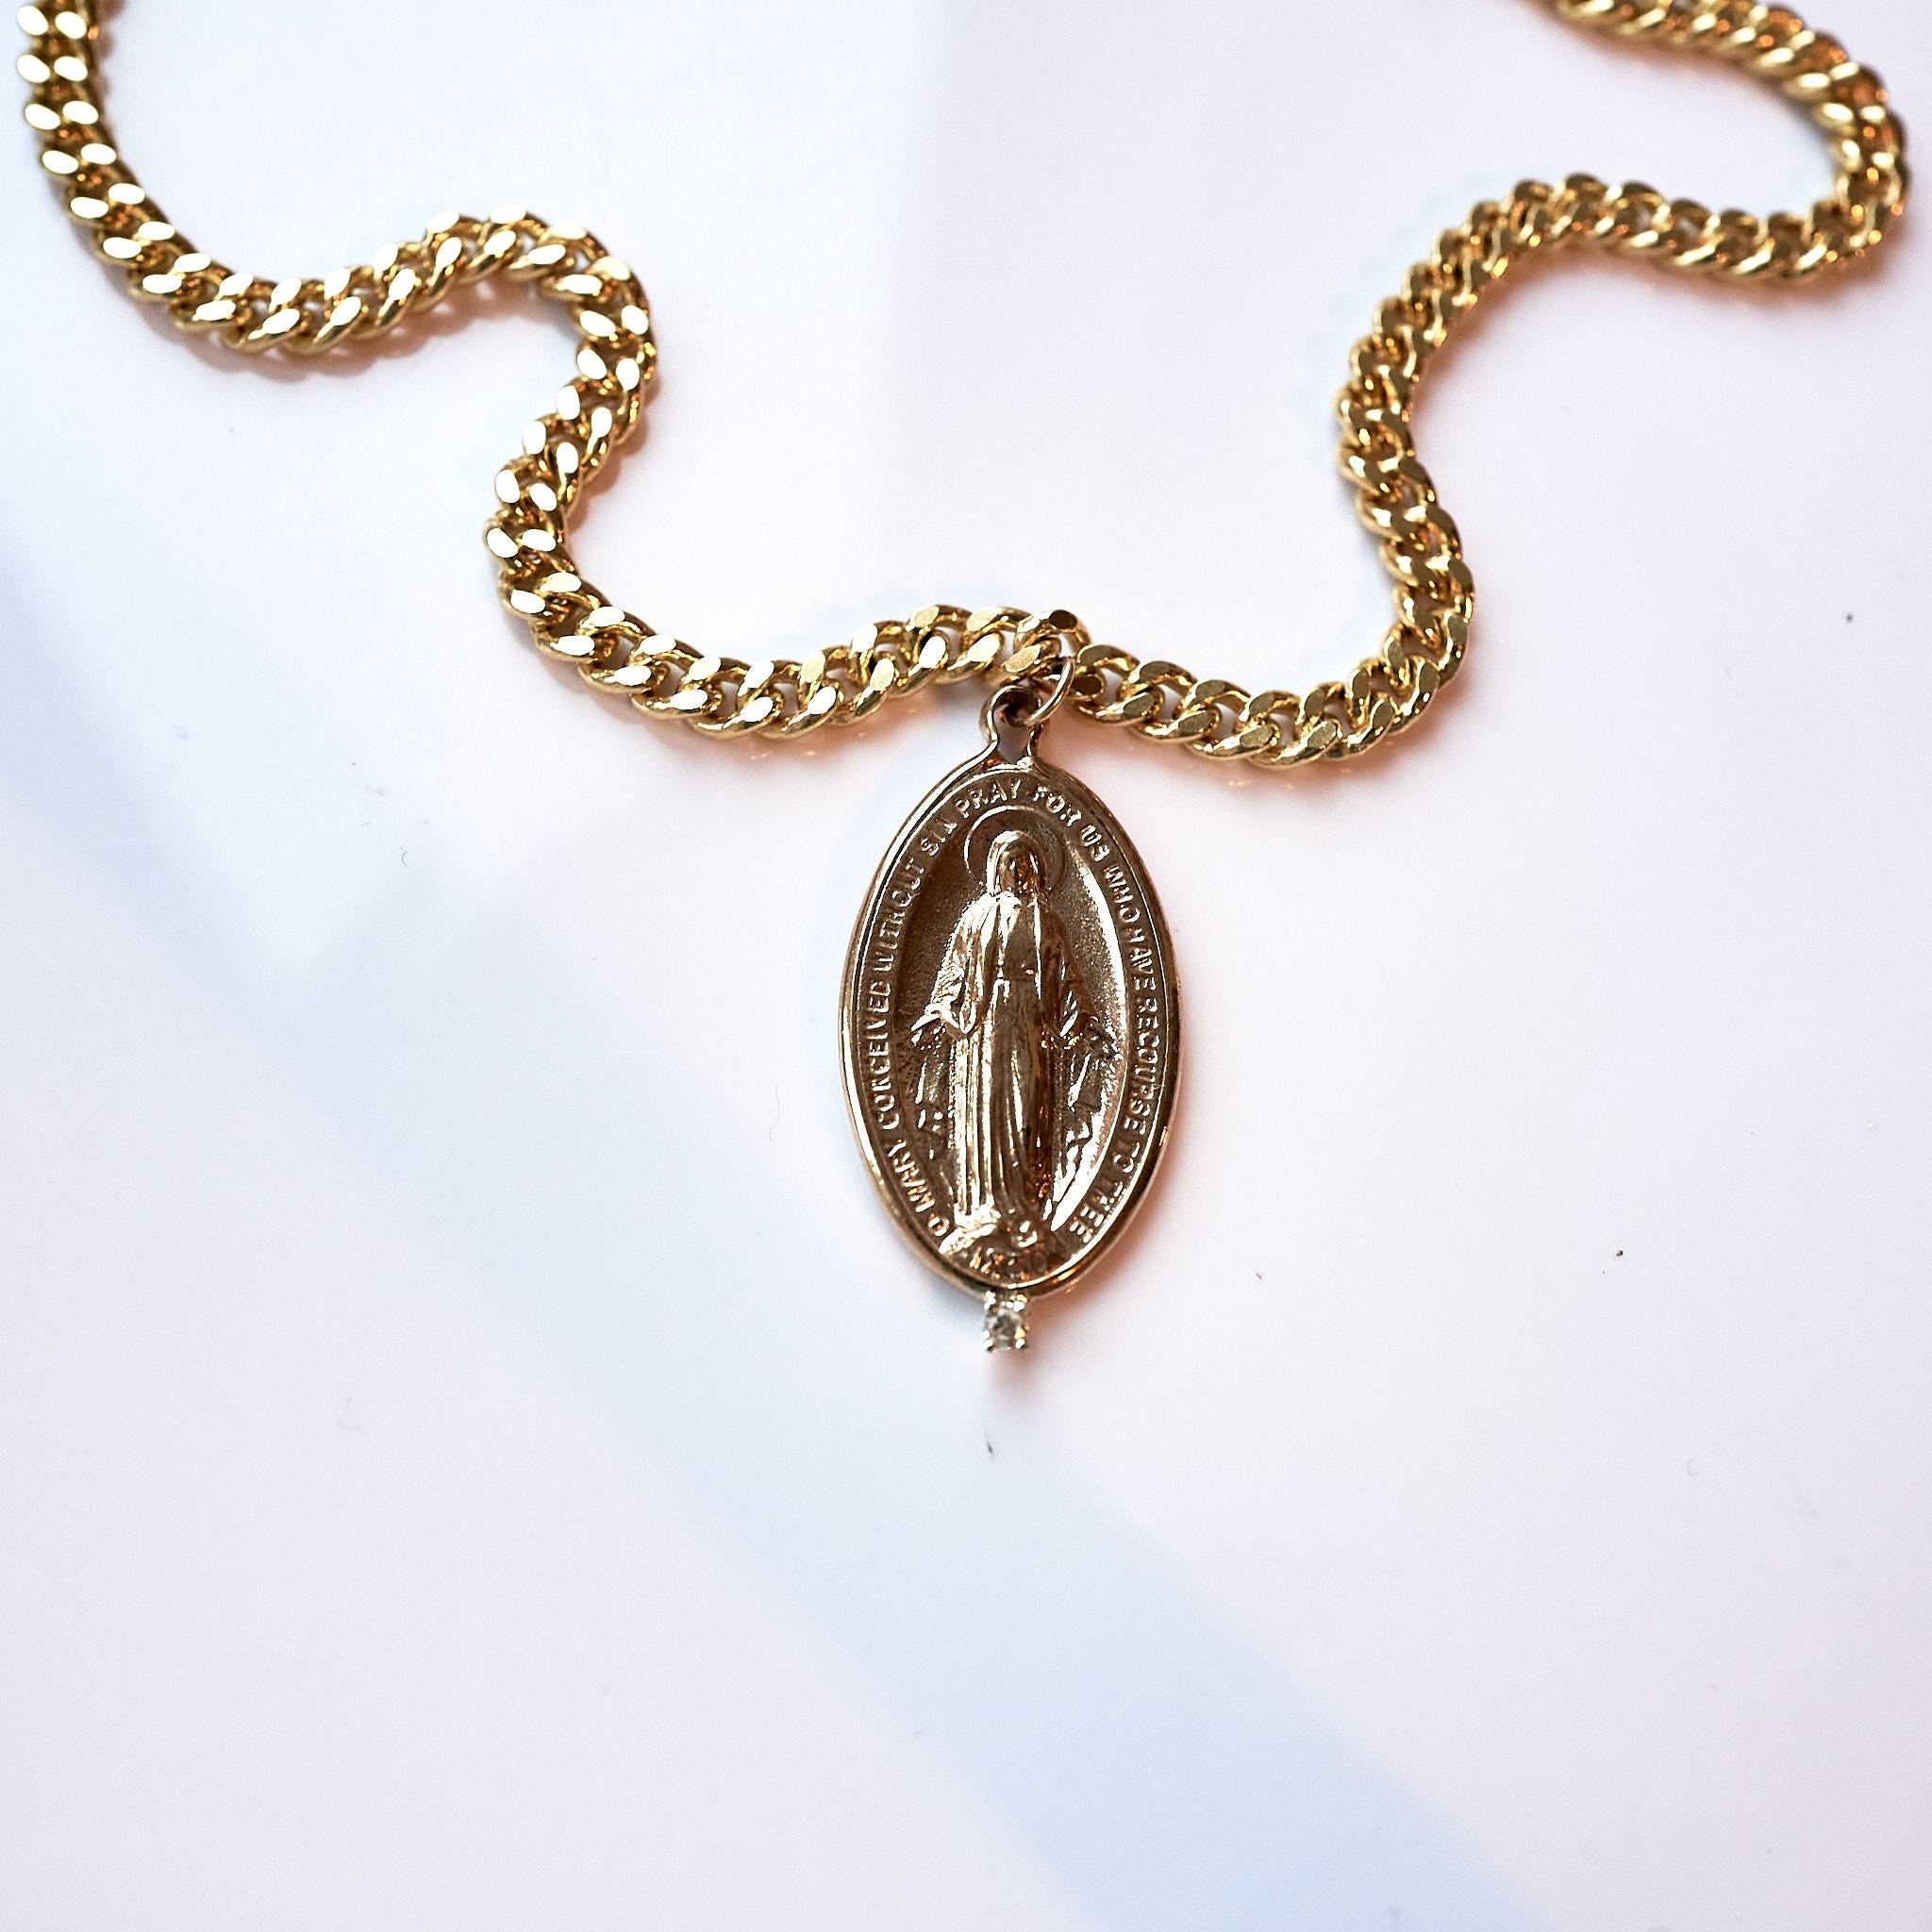 White Medal Virgin Mary Oval Medal Chain Necklace J Dauphin For Sale 4